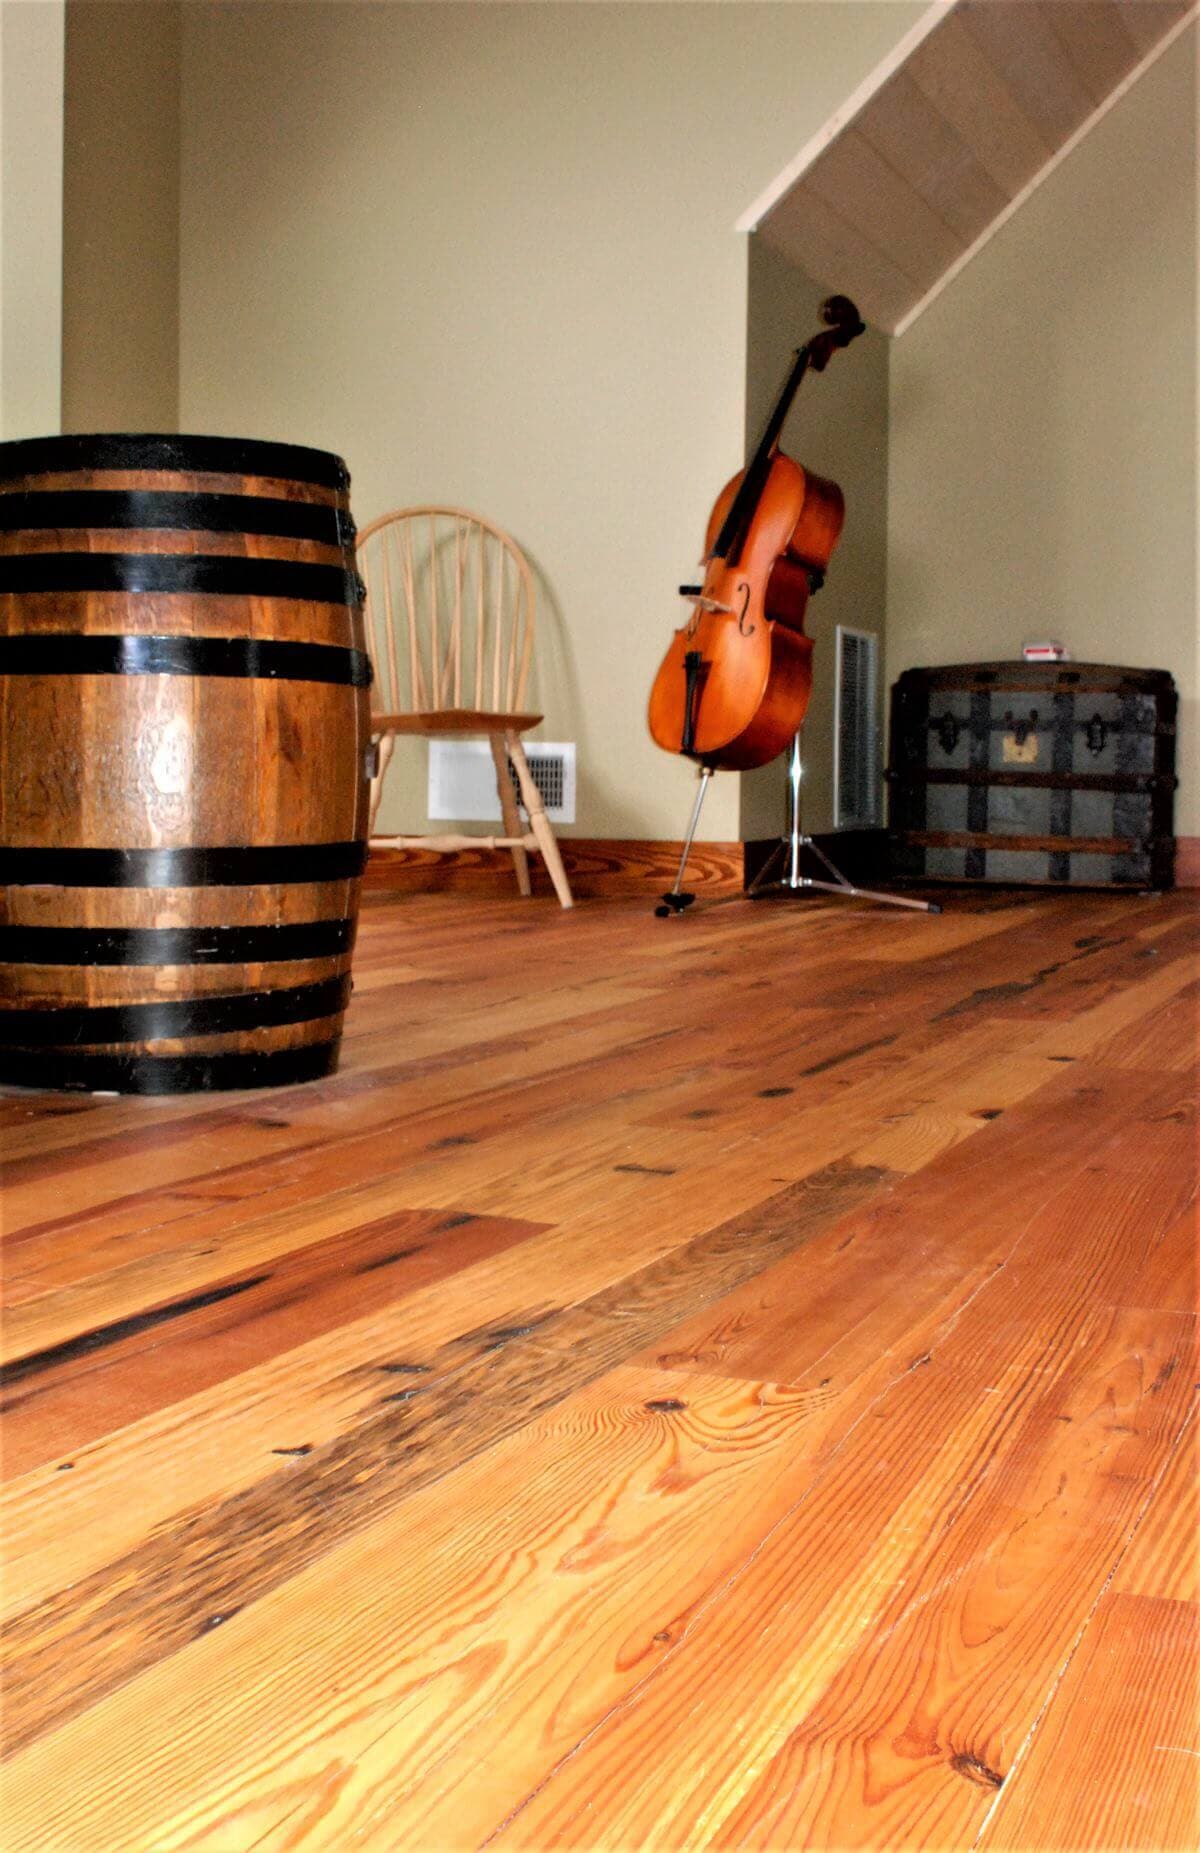 Heart pine flooring in a room with a cello hendersonville nc